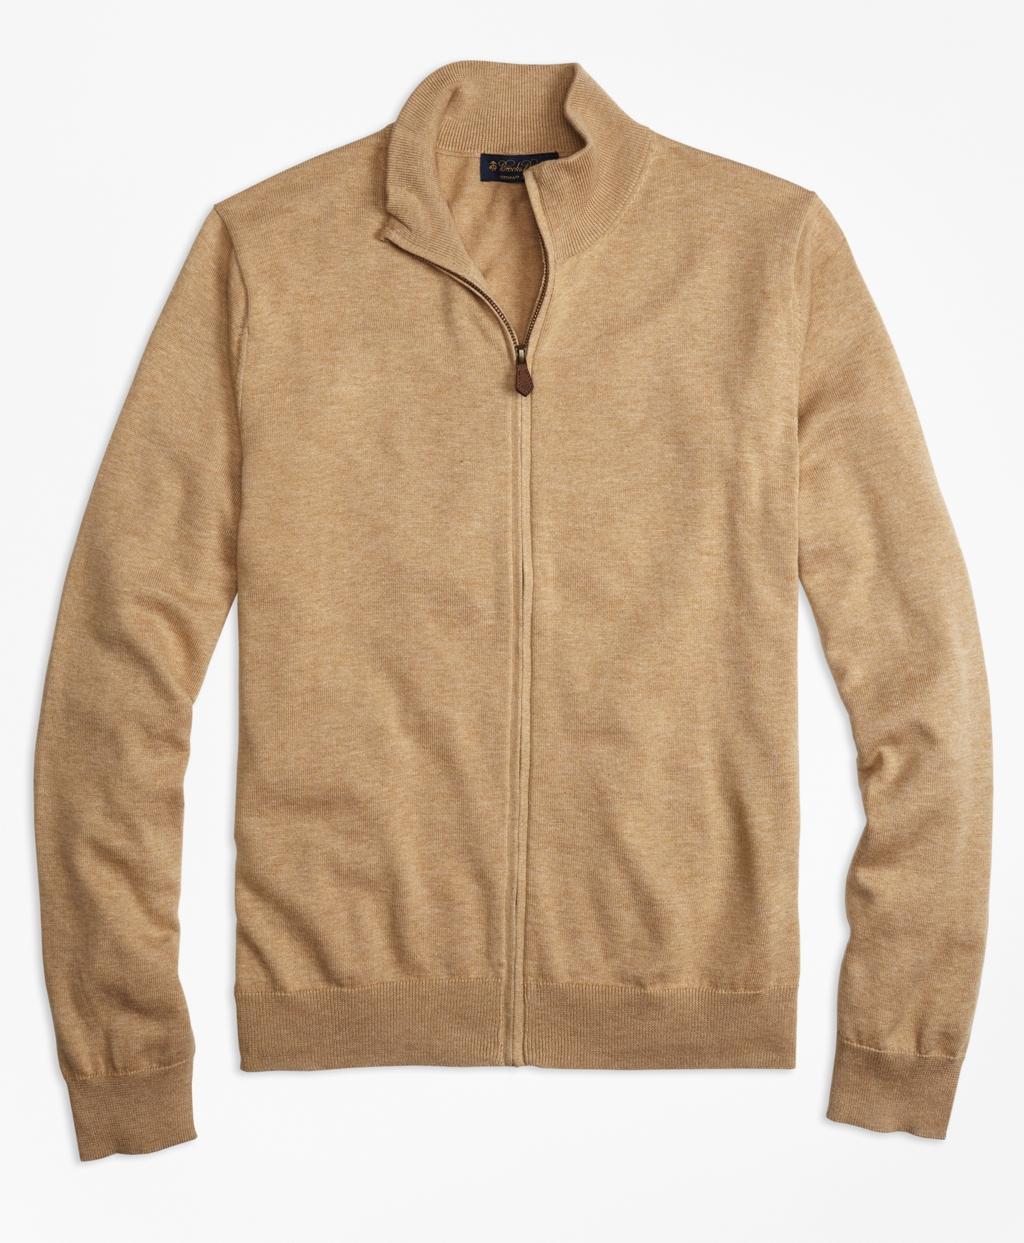 Lyst - Brooks Brothers Supima® Cotton Full-zip Cardigan in Brown for Men